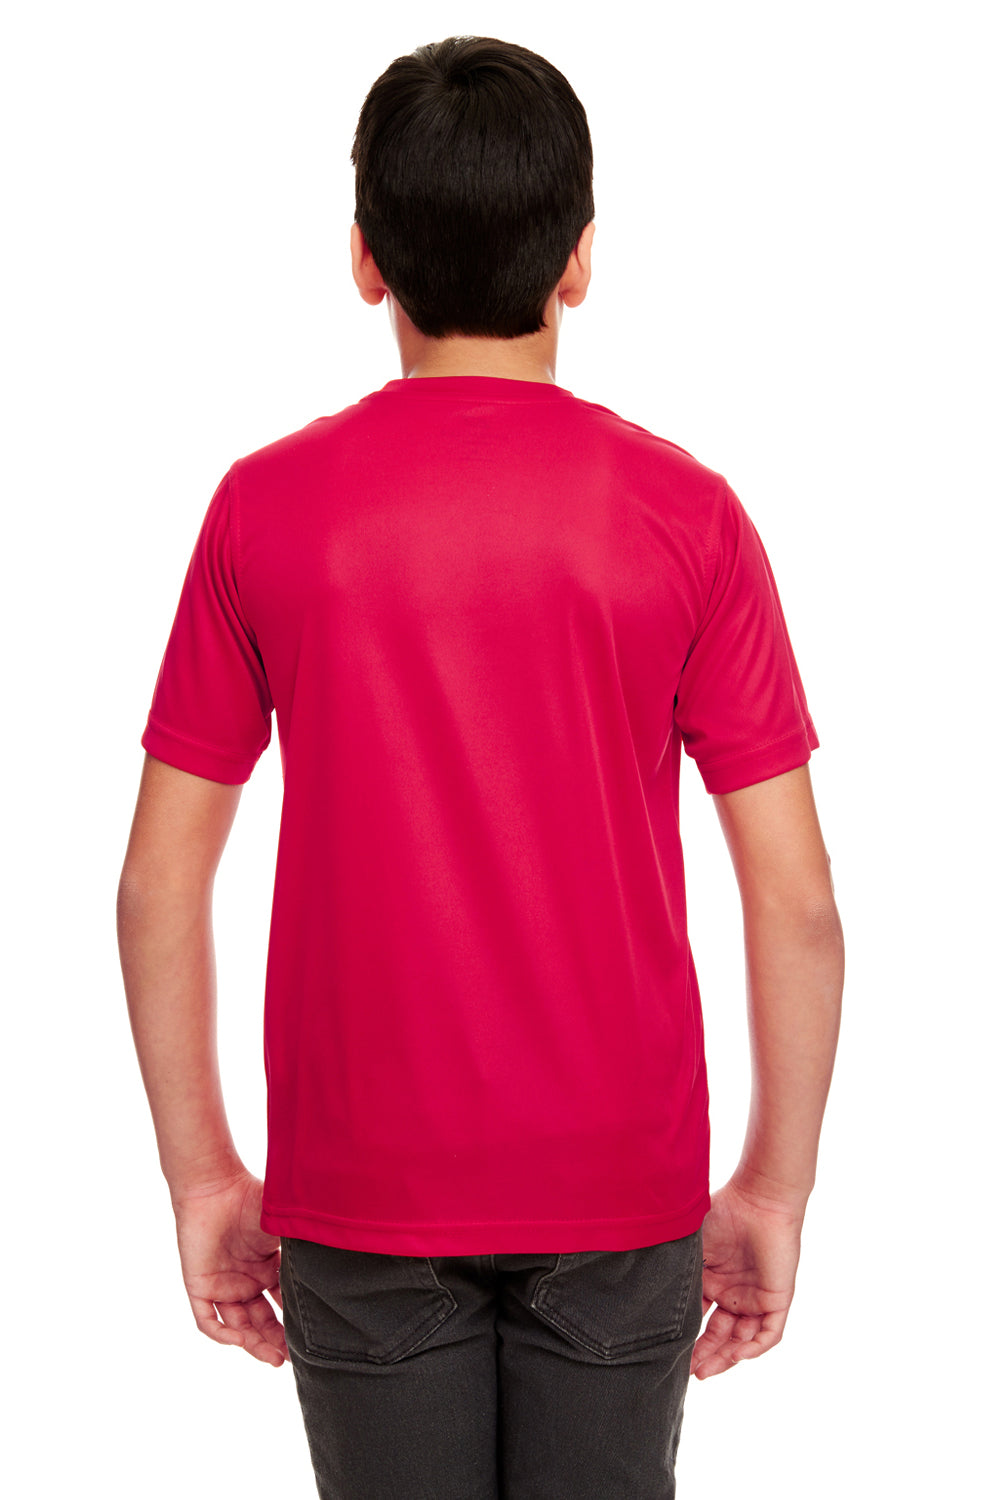 UltraClub 8420Y Youth Cool & Dry Performance Moisture Wicking Short Sleeve Crewneck T-Shirt Red Back